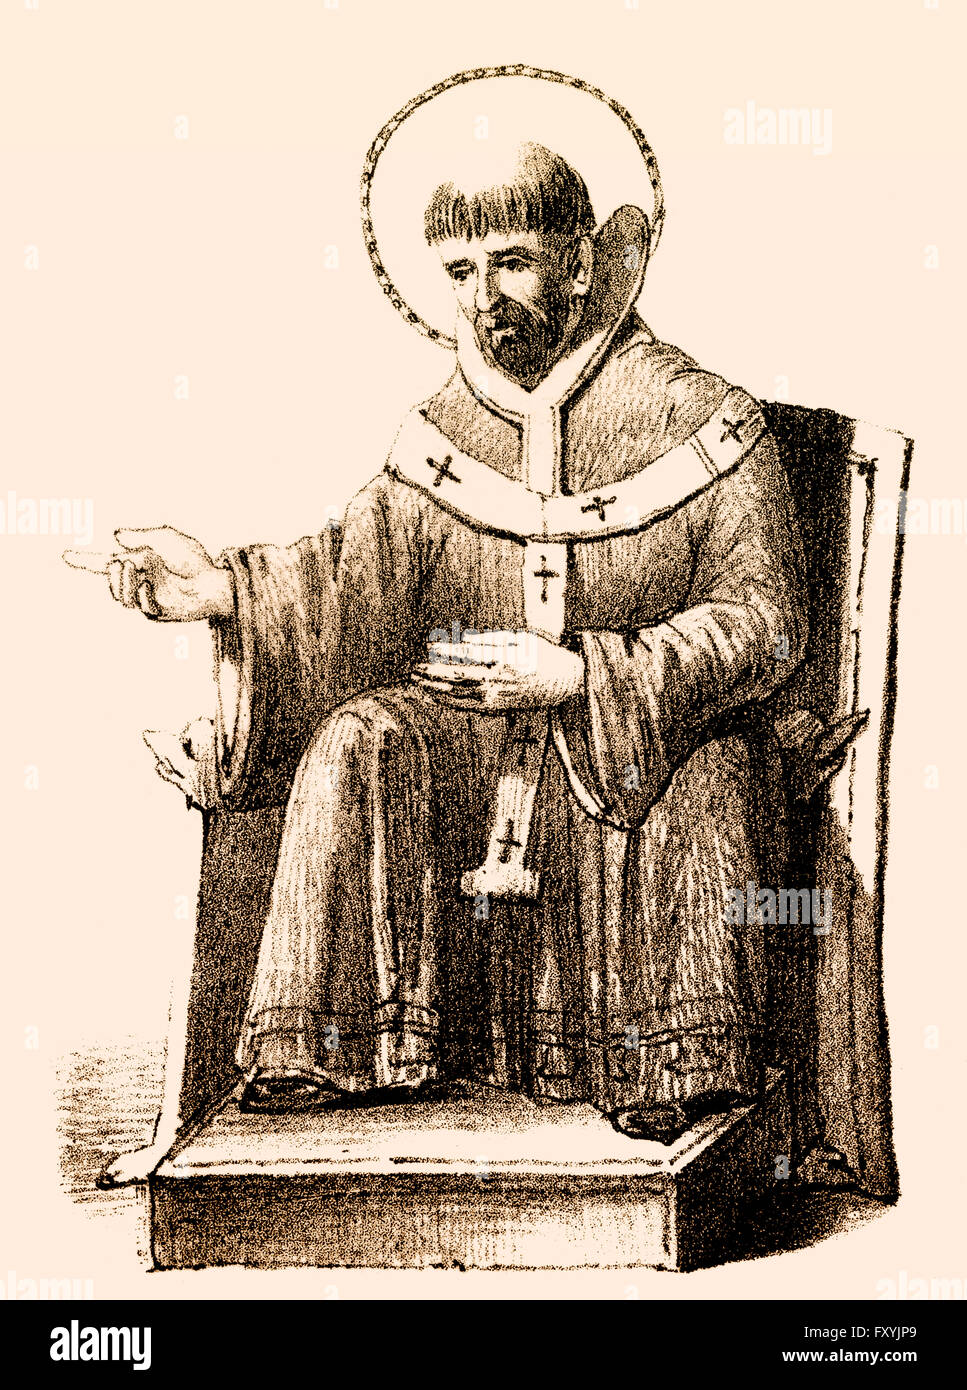 Augustine of Canterbury, 6th century, a Benedictine monk, the first Archbishop of Canterbury, Apostle to the English, founder of Stock Photo